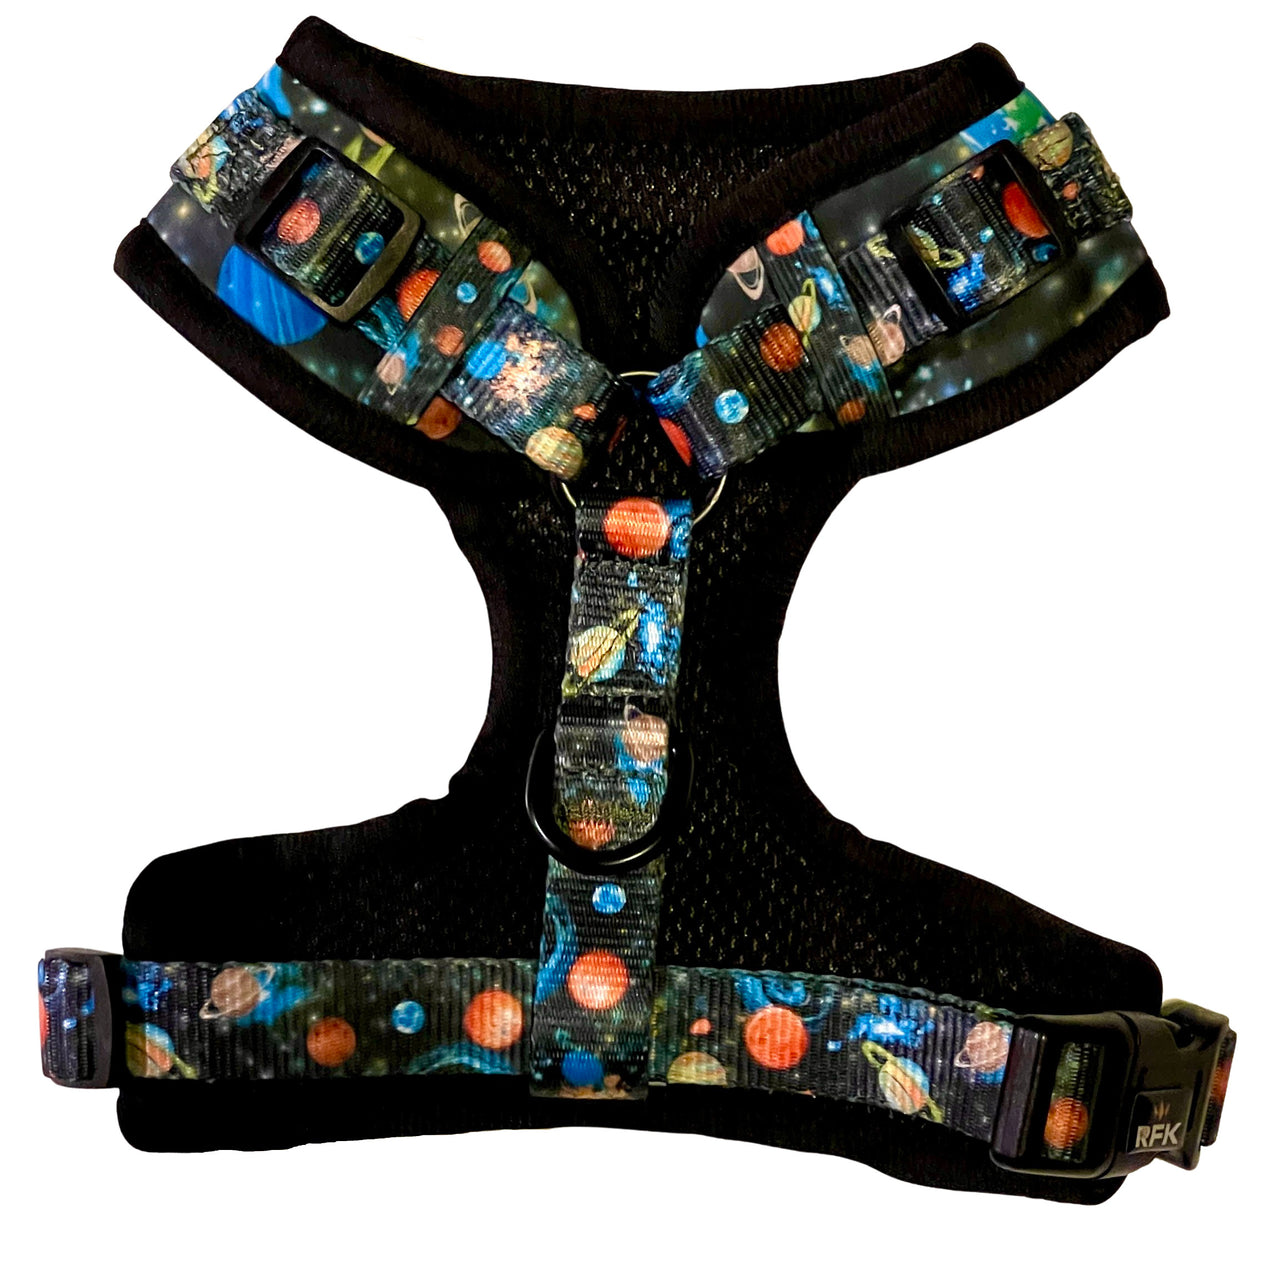 Intergalactic Space Odyssey Harness